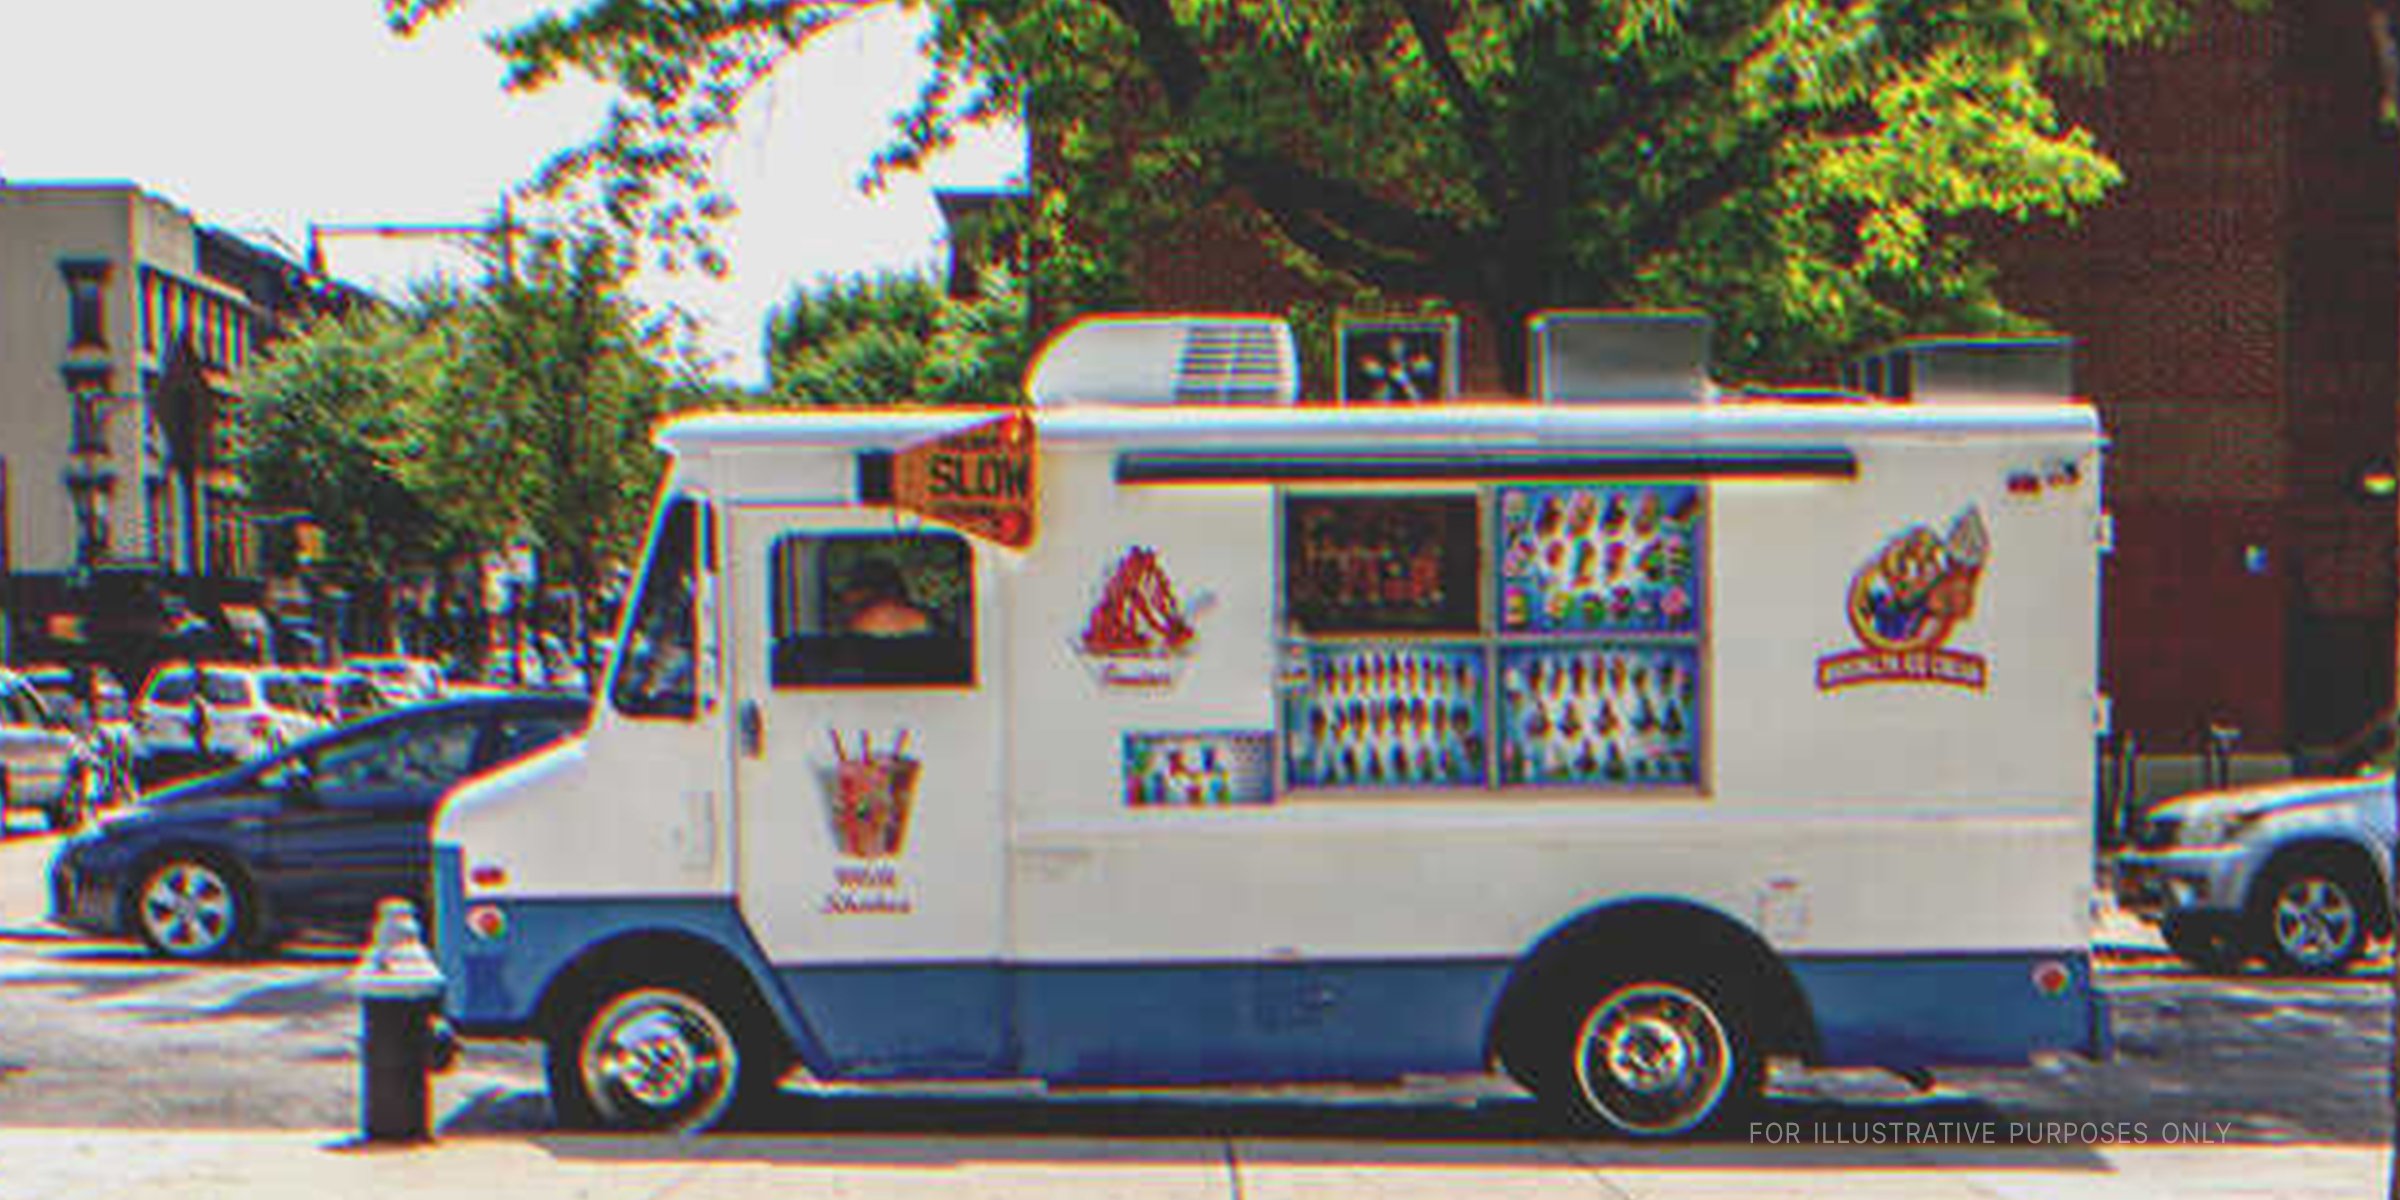 A food truck on the street | Source: Shutterstock